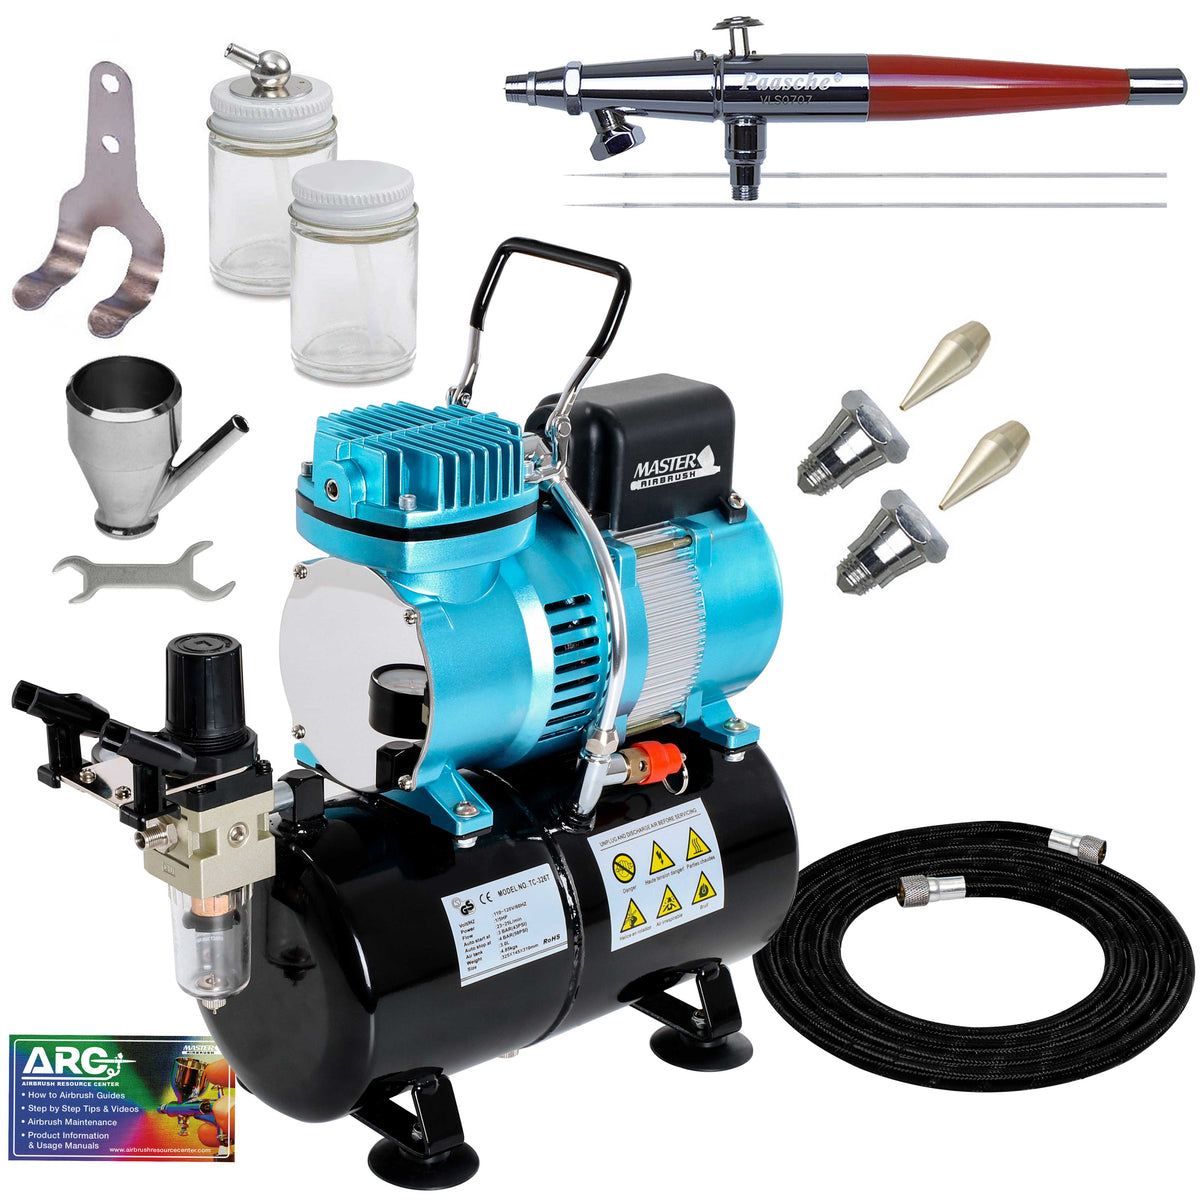 VLS Series Dual-Action Siphon Feed Airbrush Kit with Master TC-20T Compressor & Air Hose